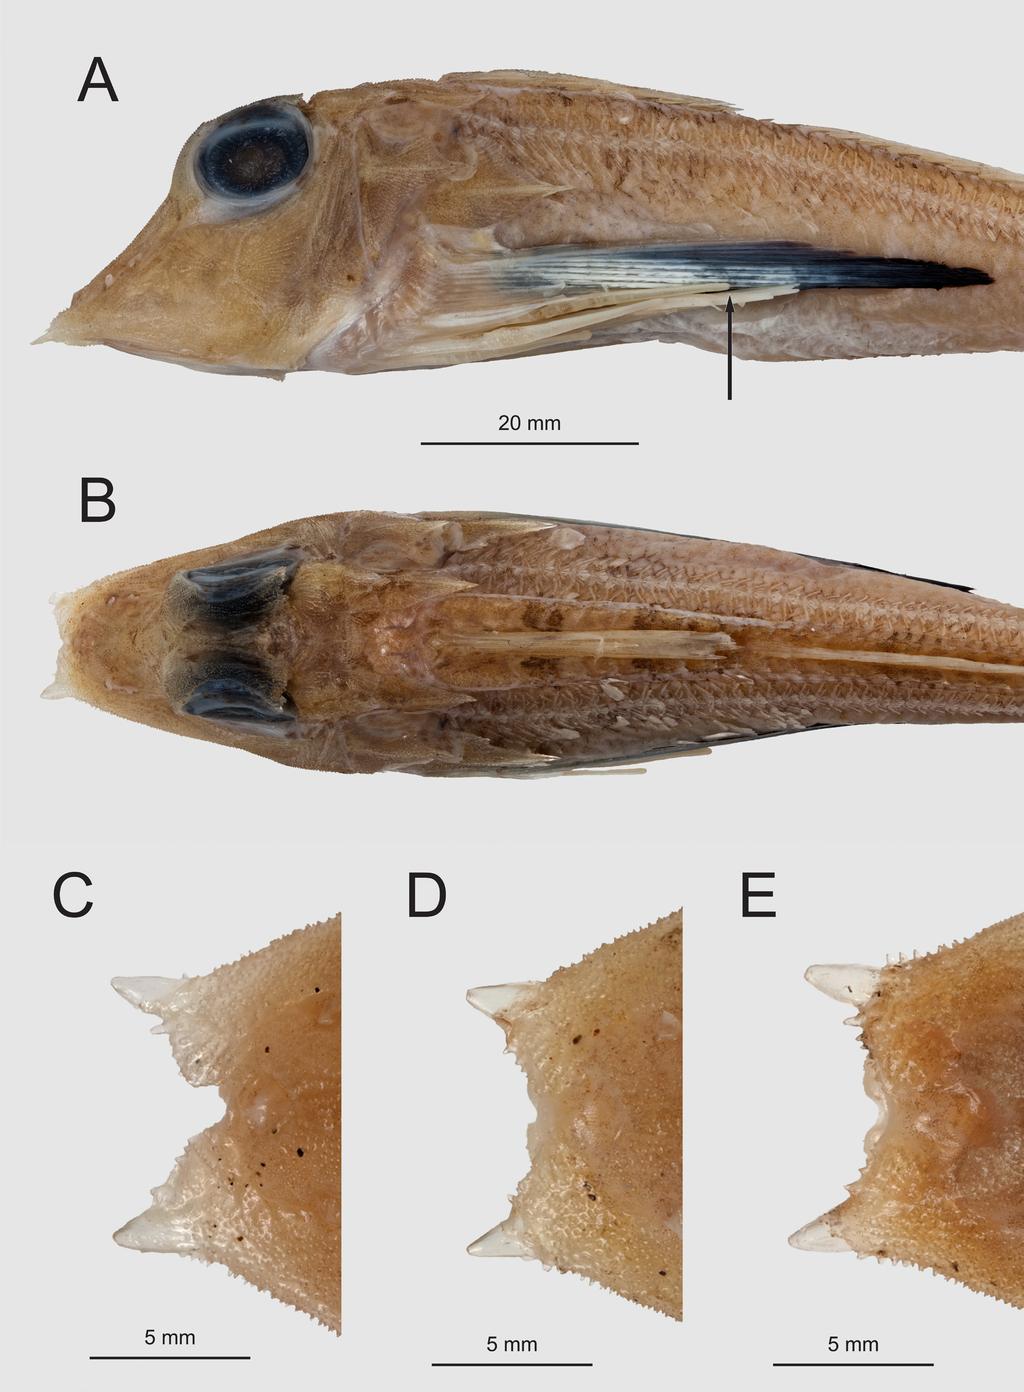 RAFFLES BULLETIN OF ZOOLOGY 2018 Fig. 2. Lepidotrigla cf. japonica. Lateral and dorsal views of head, A, B, NMV A 31968-001, 99.